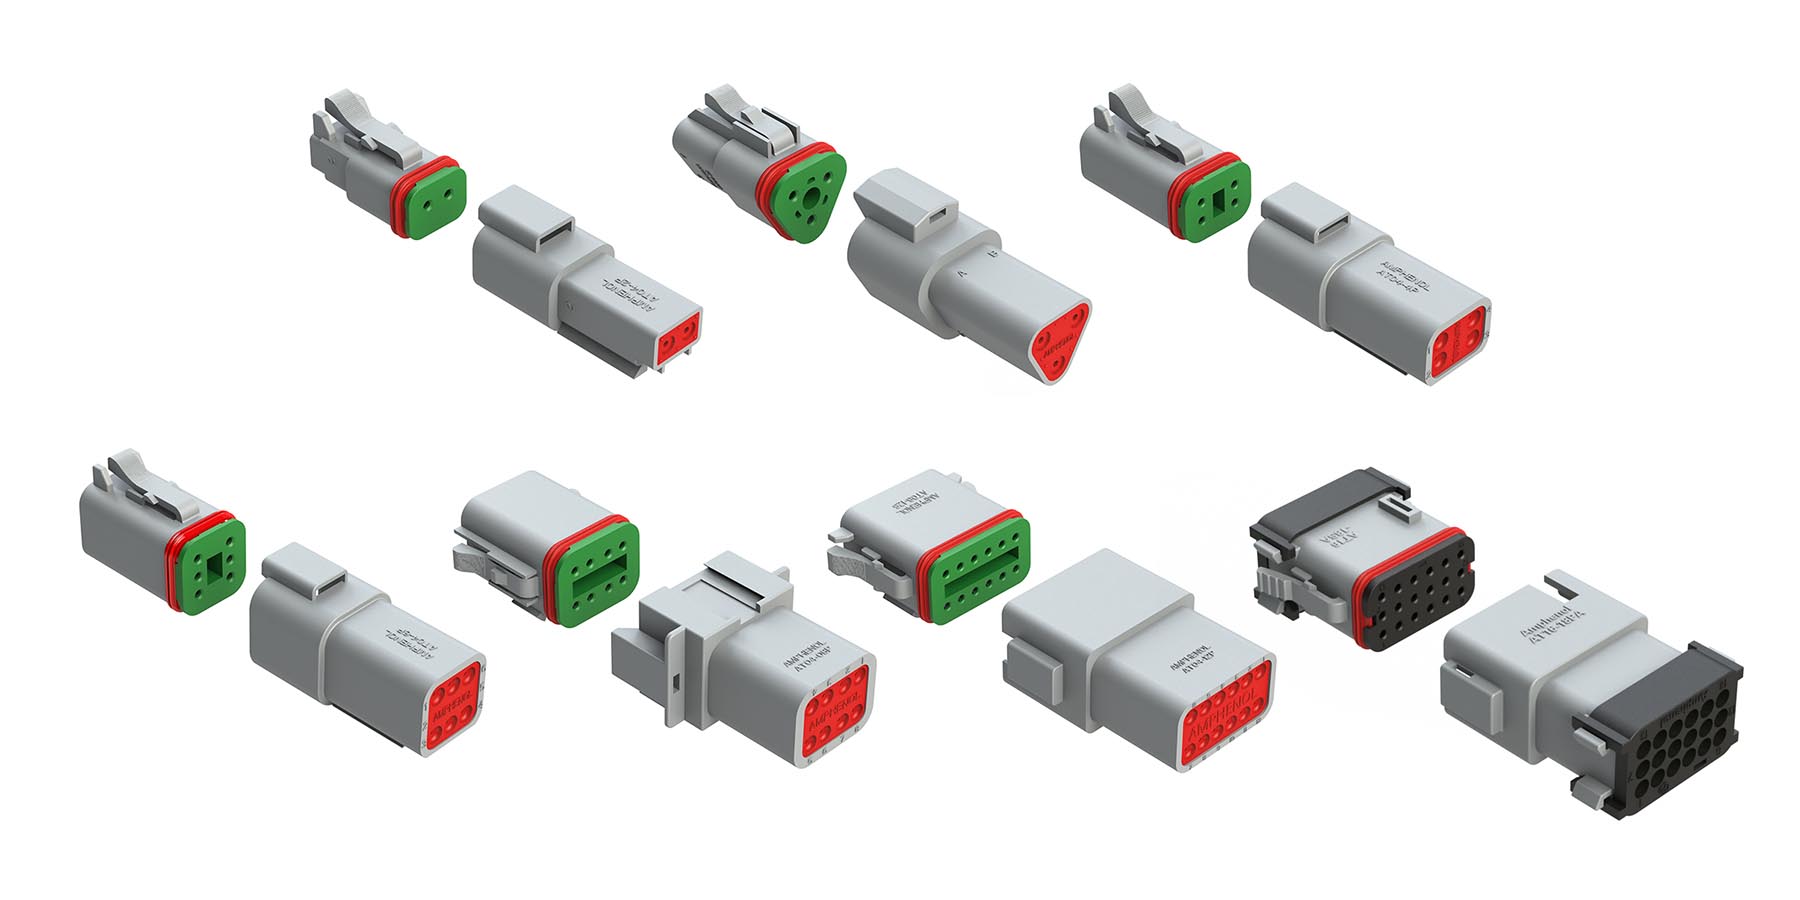 Allied Electronics & Automation supplies Amphenol Sine Systems’ AT Series connectors for harsh environments